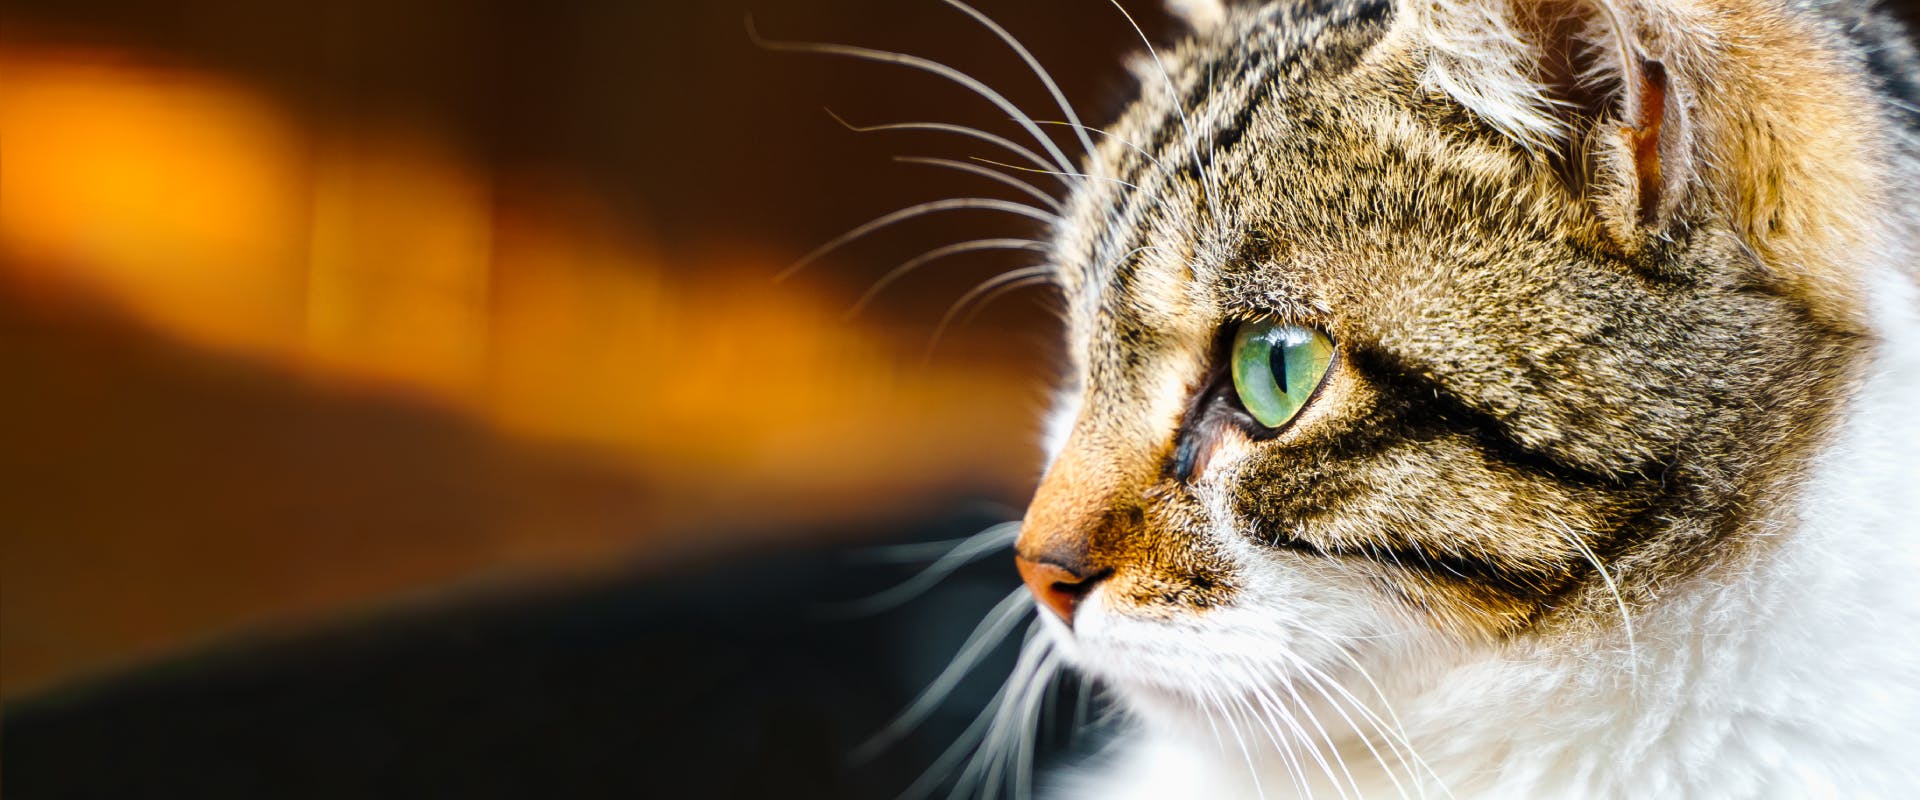 an indoor tabby cat with bright green eyes looking off to the left out of a window in an urban area